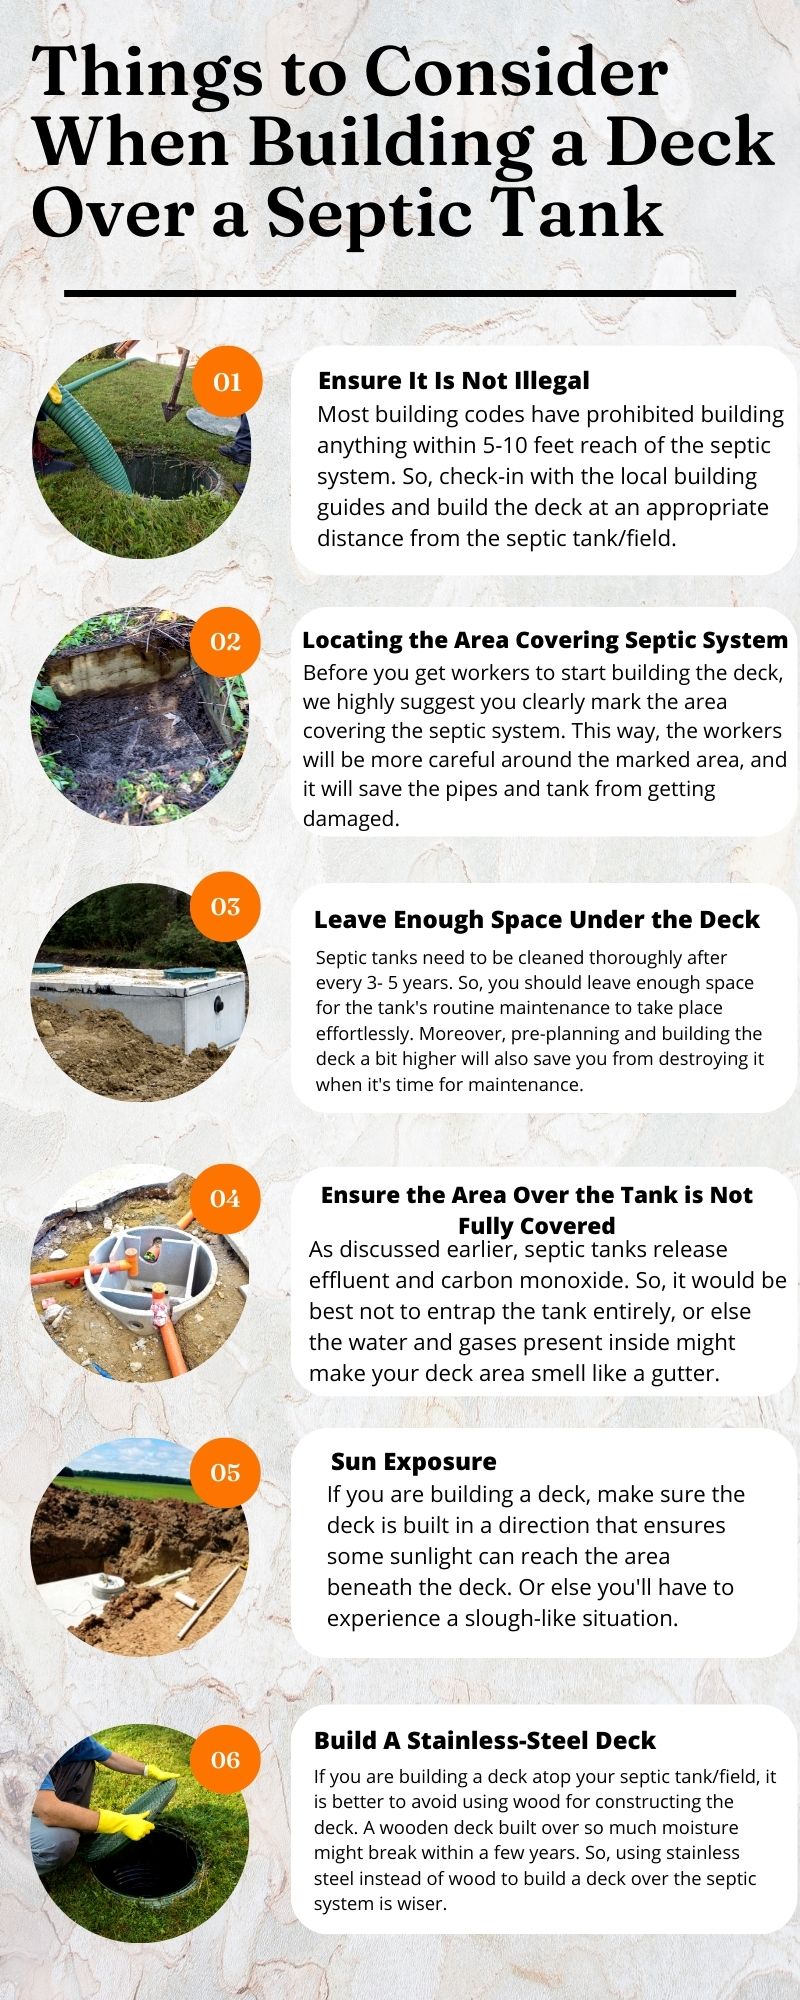 Things-to-Consider-When-Building-a-Deck-Over-a-Septic-Tank-1